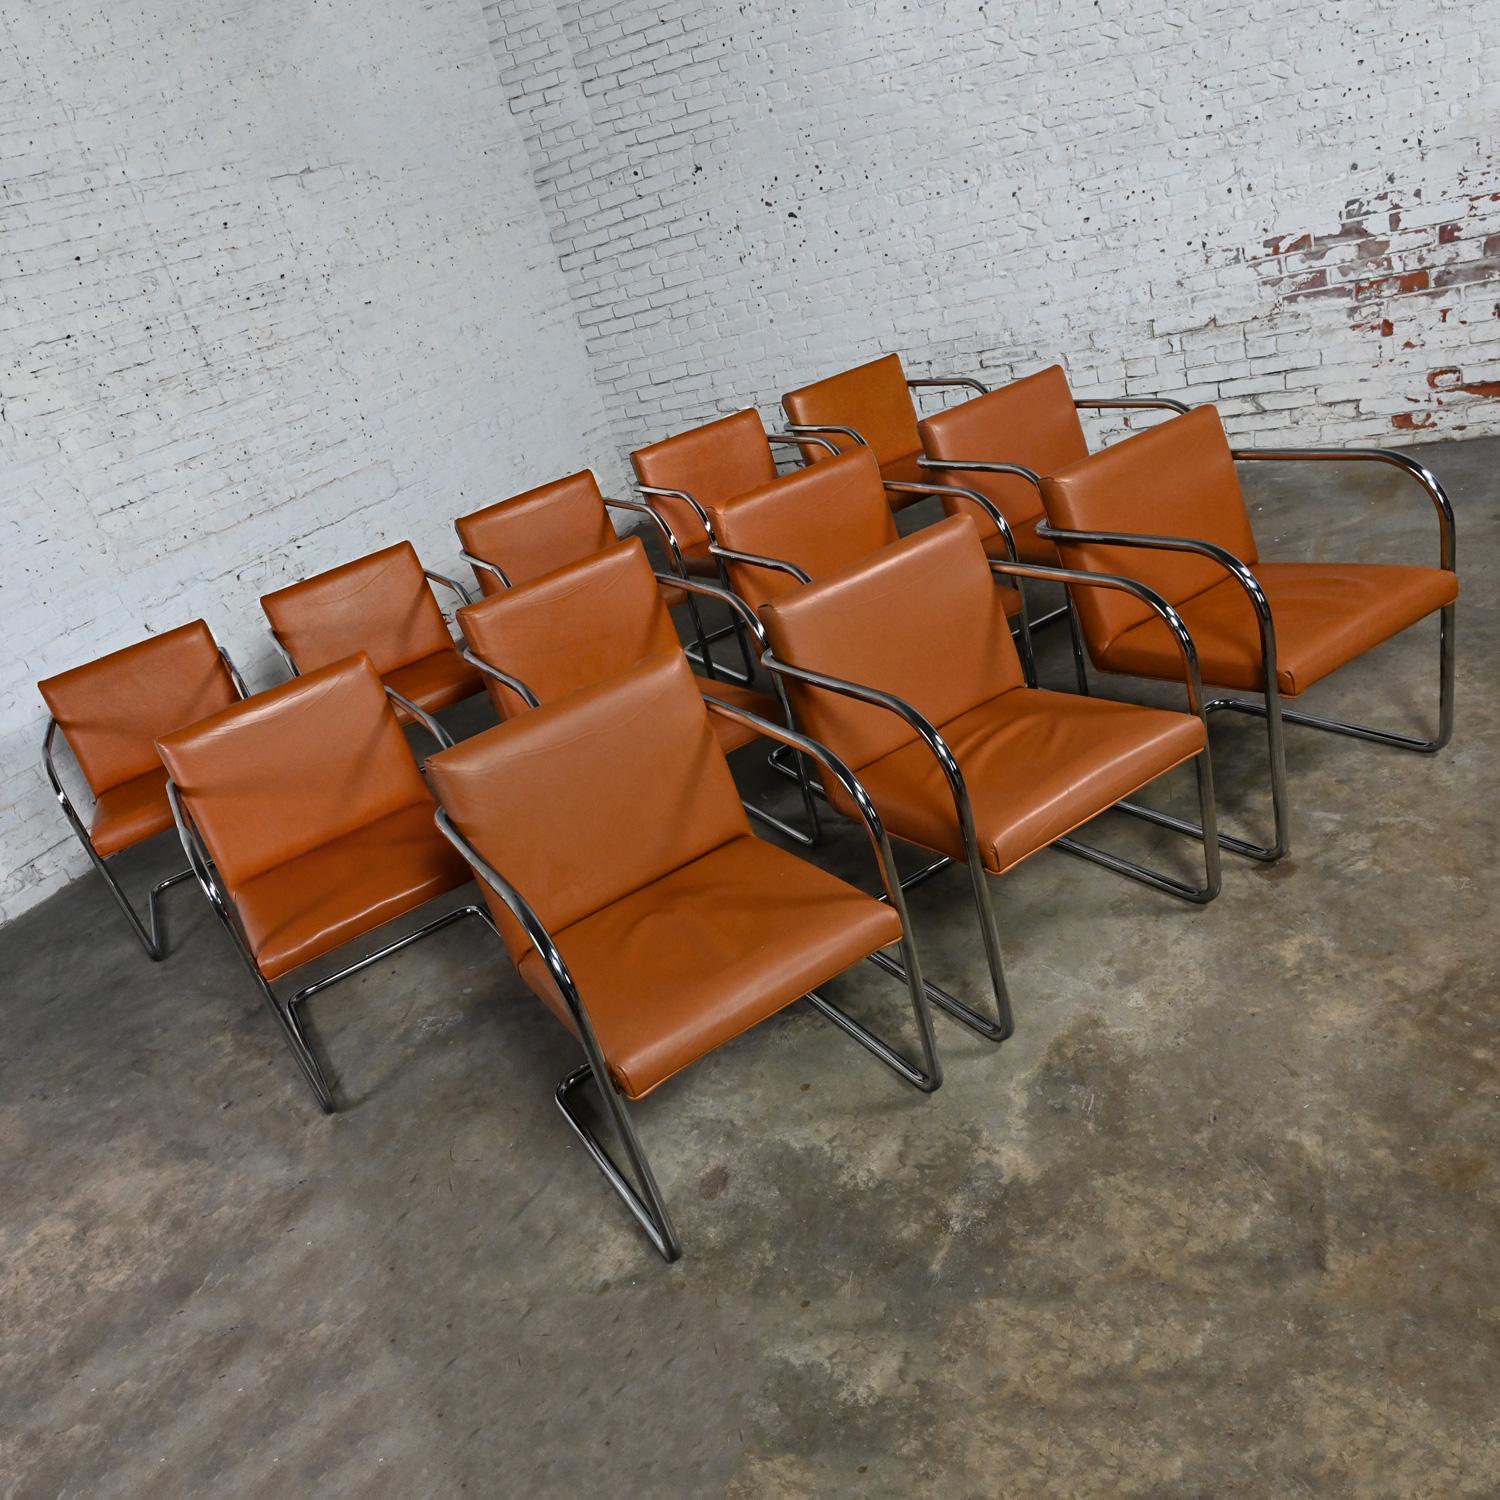 American Thonet Bauhaus Brno Style Chairs Chrome & Cognac Leather Cantilever Set of 12  For Sale